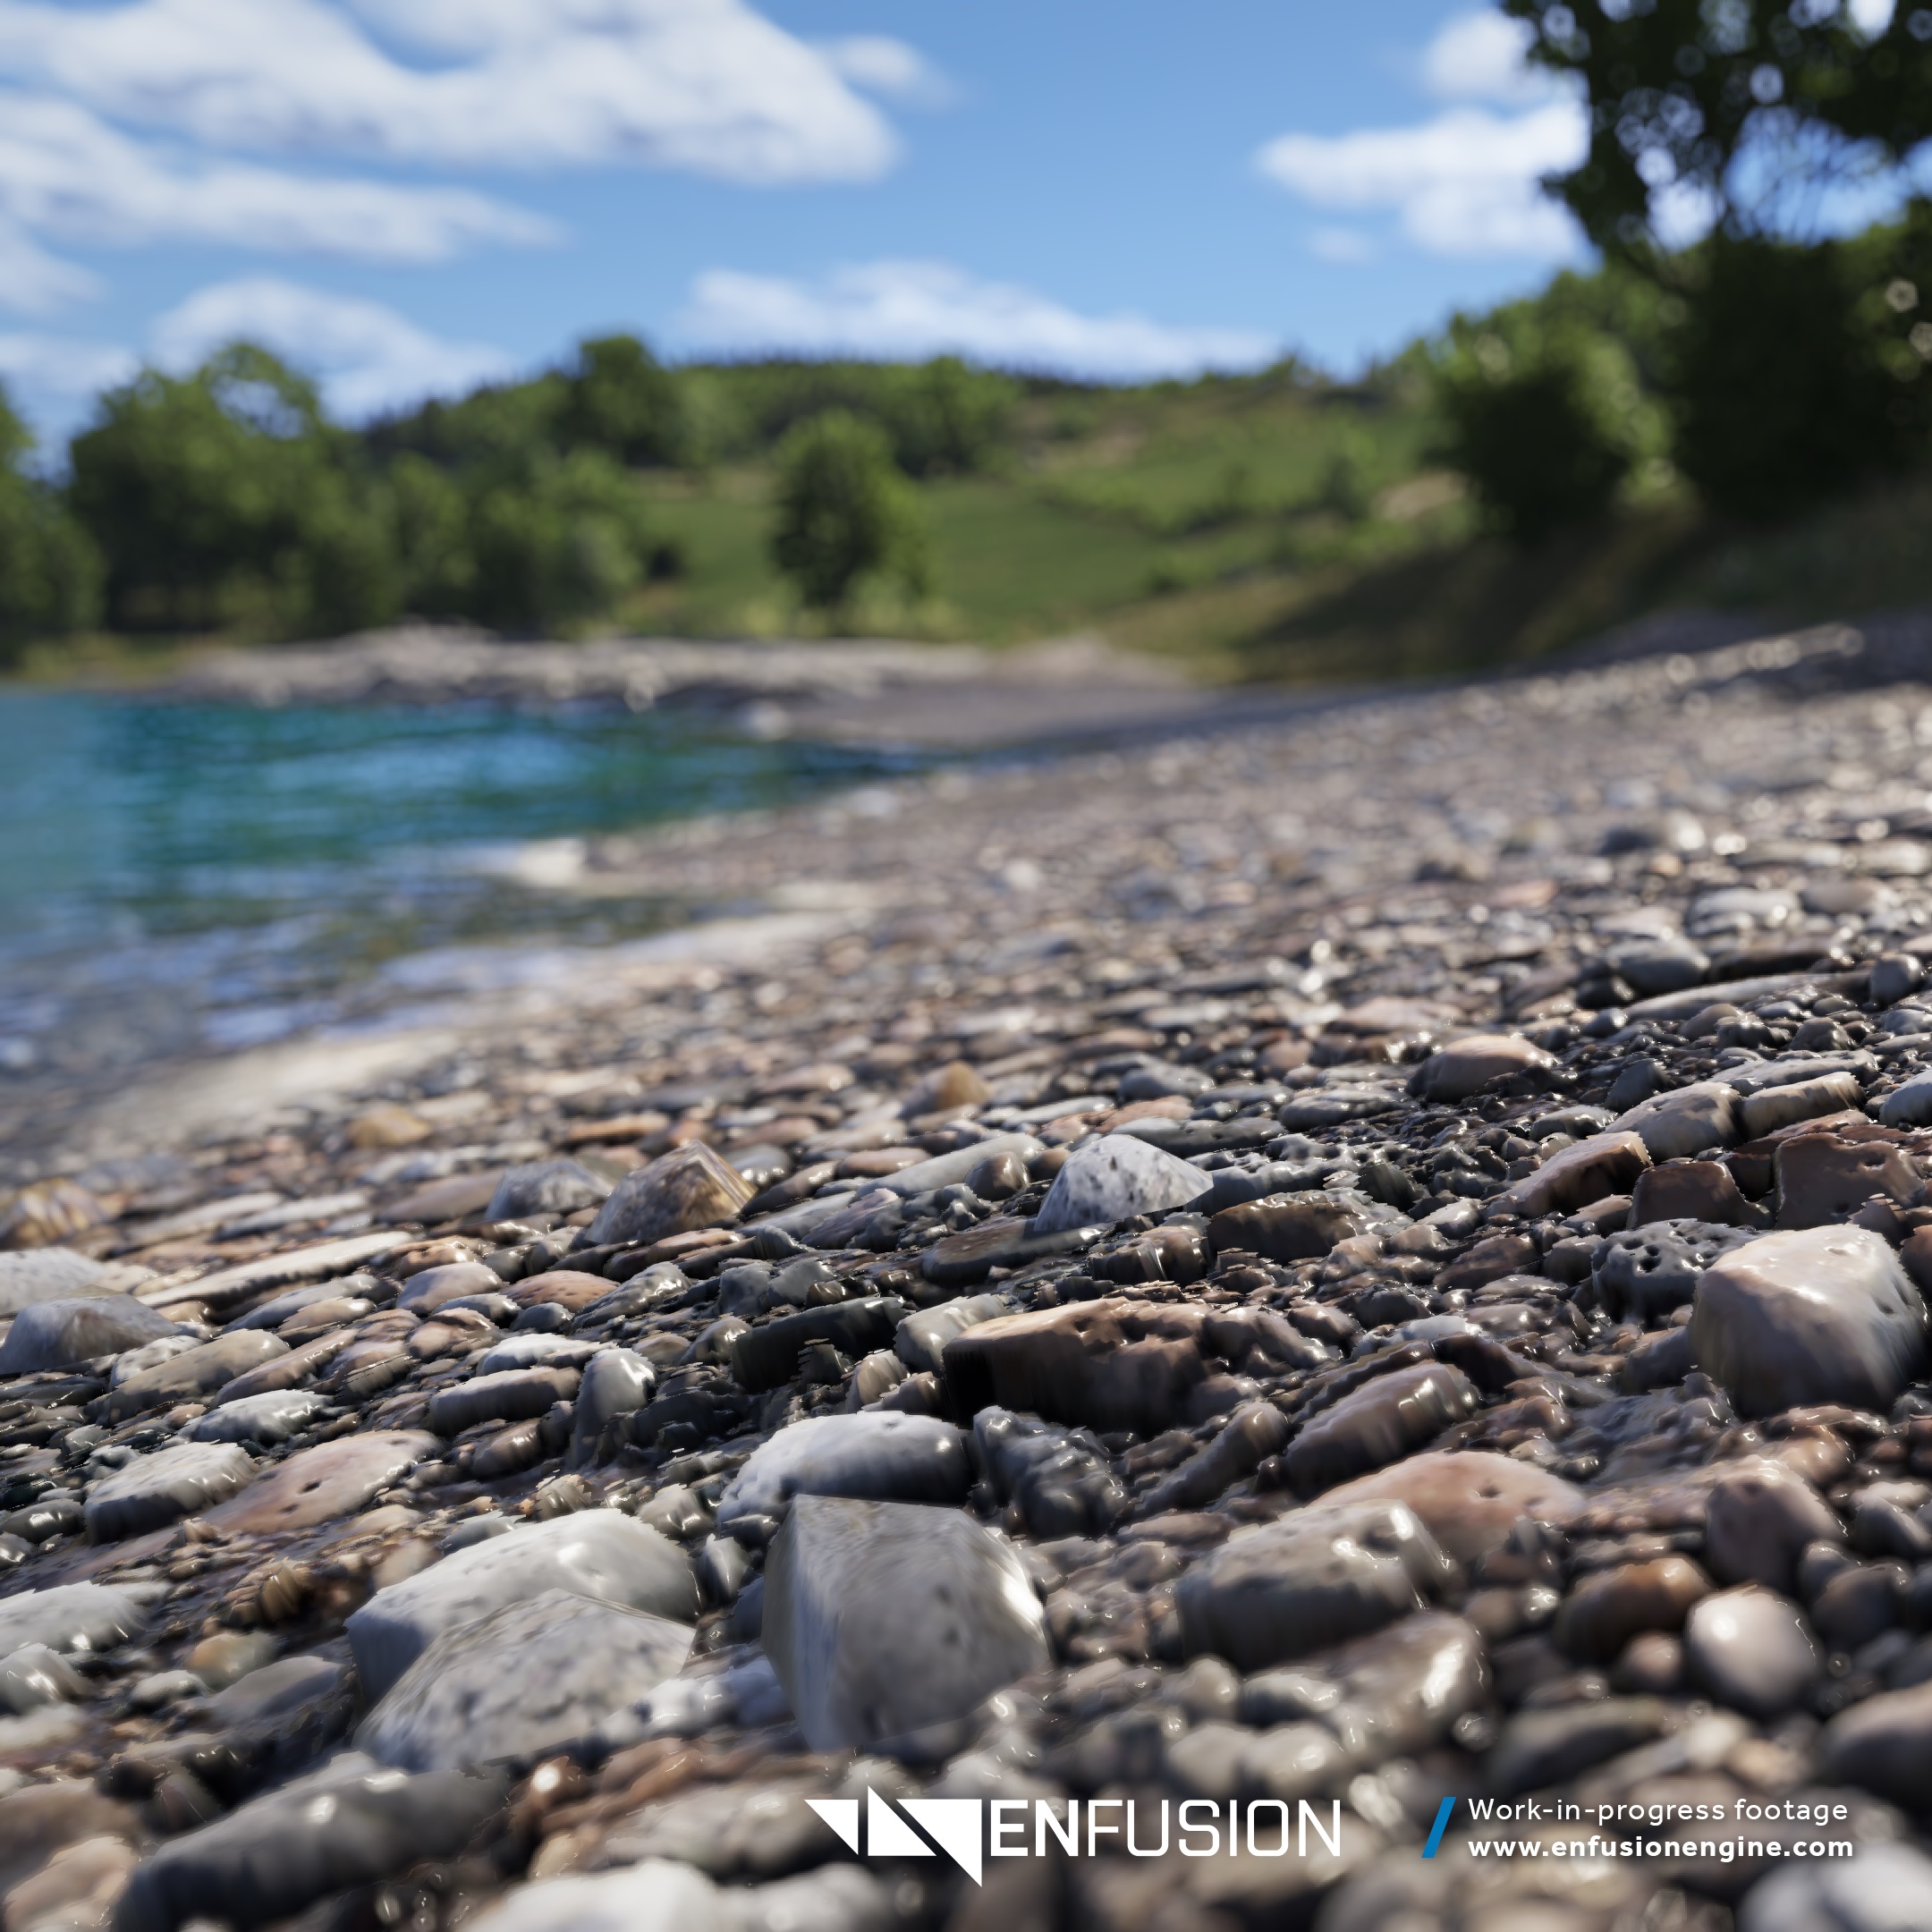 some really nicely rendered pebbles by a pond